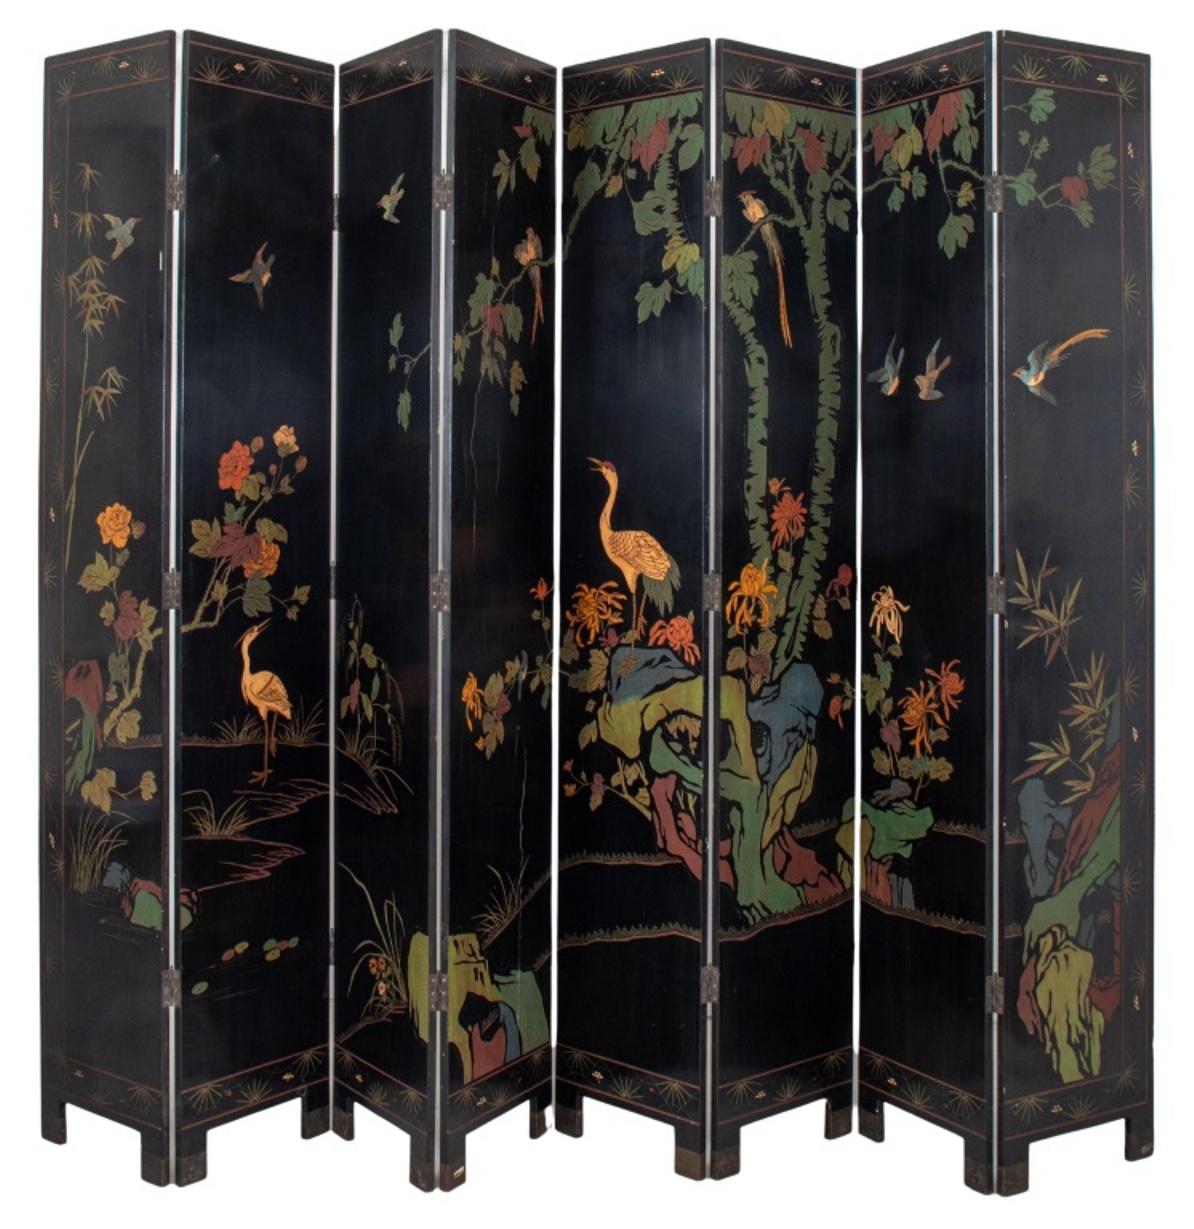 Chinese Coromandel lacquer eight panel screen, one side with gilded and polychromed court scenes, the reverse with a polychromed landscape.

Dimensions: Each panel: 96